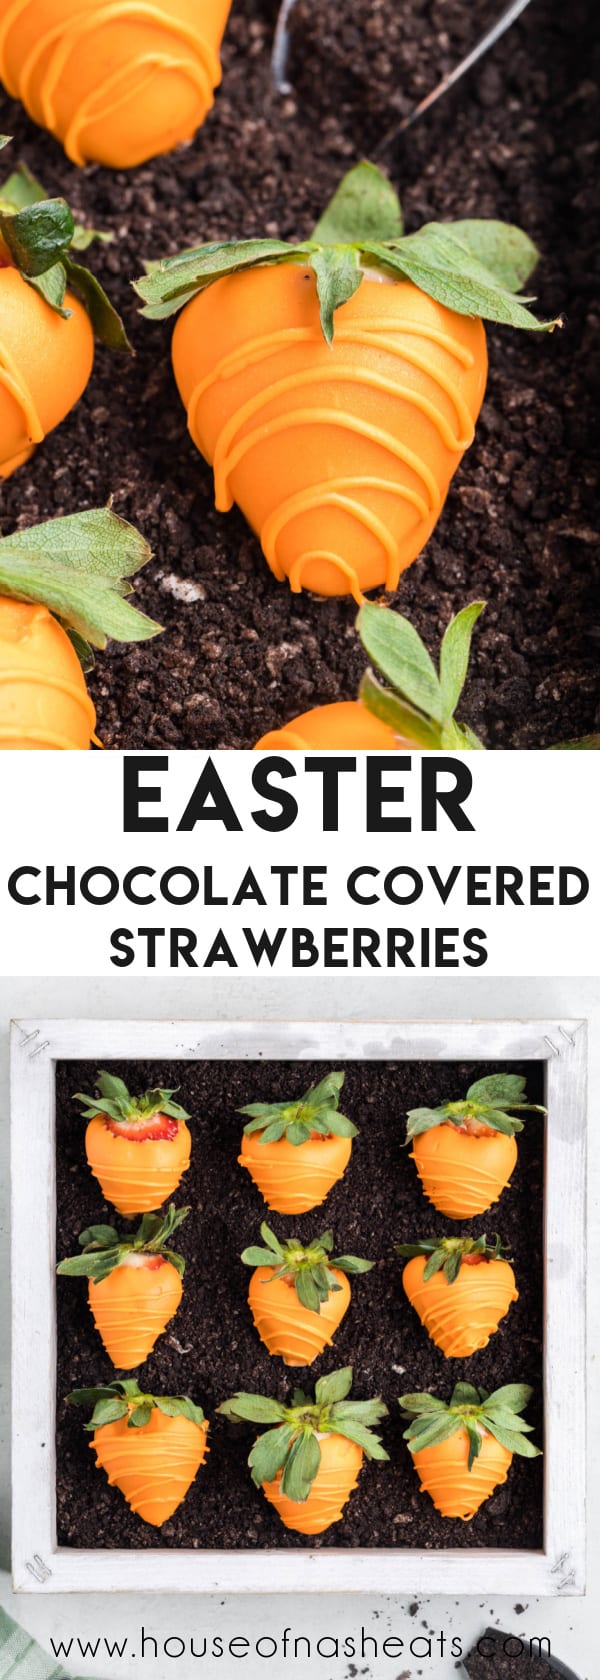 A collage of images of chocolate covered strawberry carrots with text overlay.